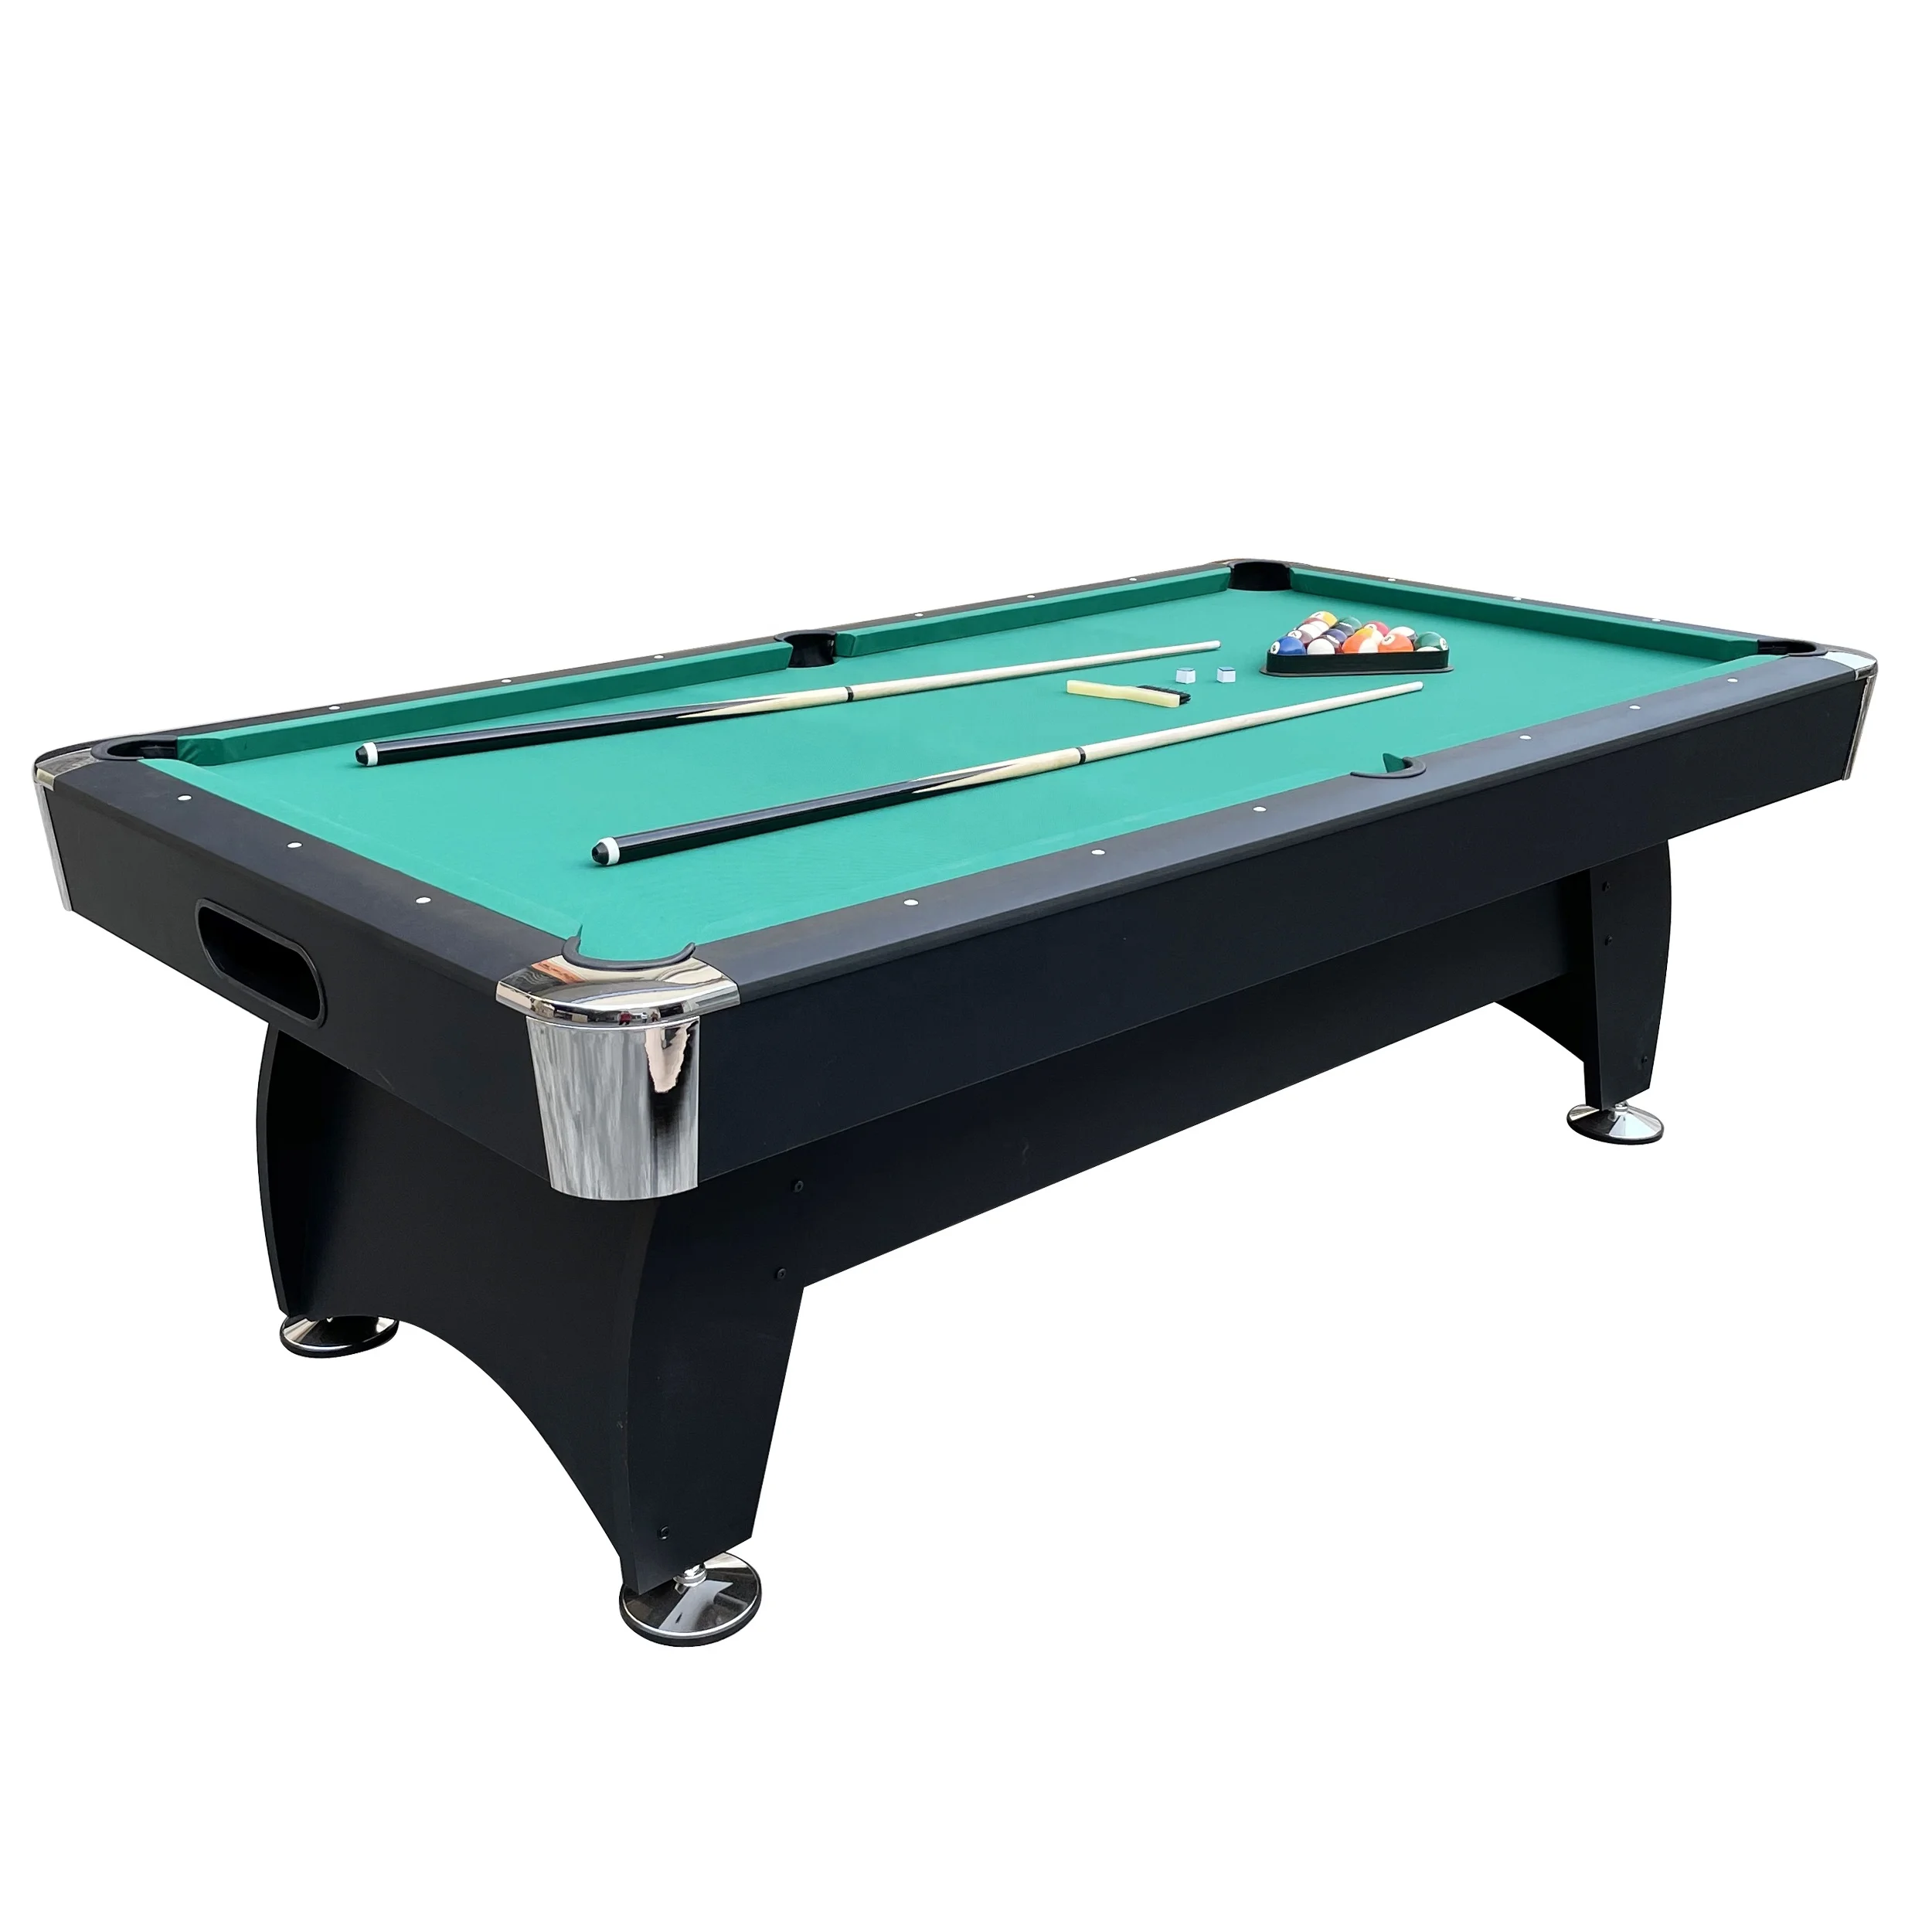 New designed 84 inch 7ft  Billiard & Snooker Pool game table  with all accessories in Green Blue color TP-8406 TP-8407